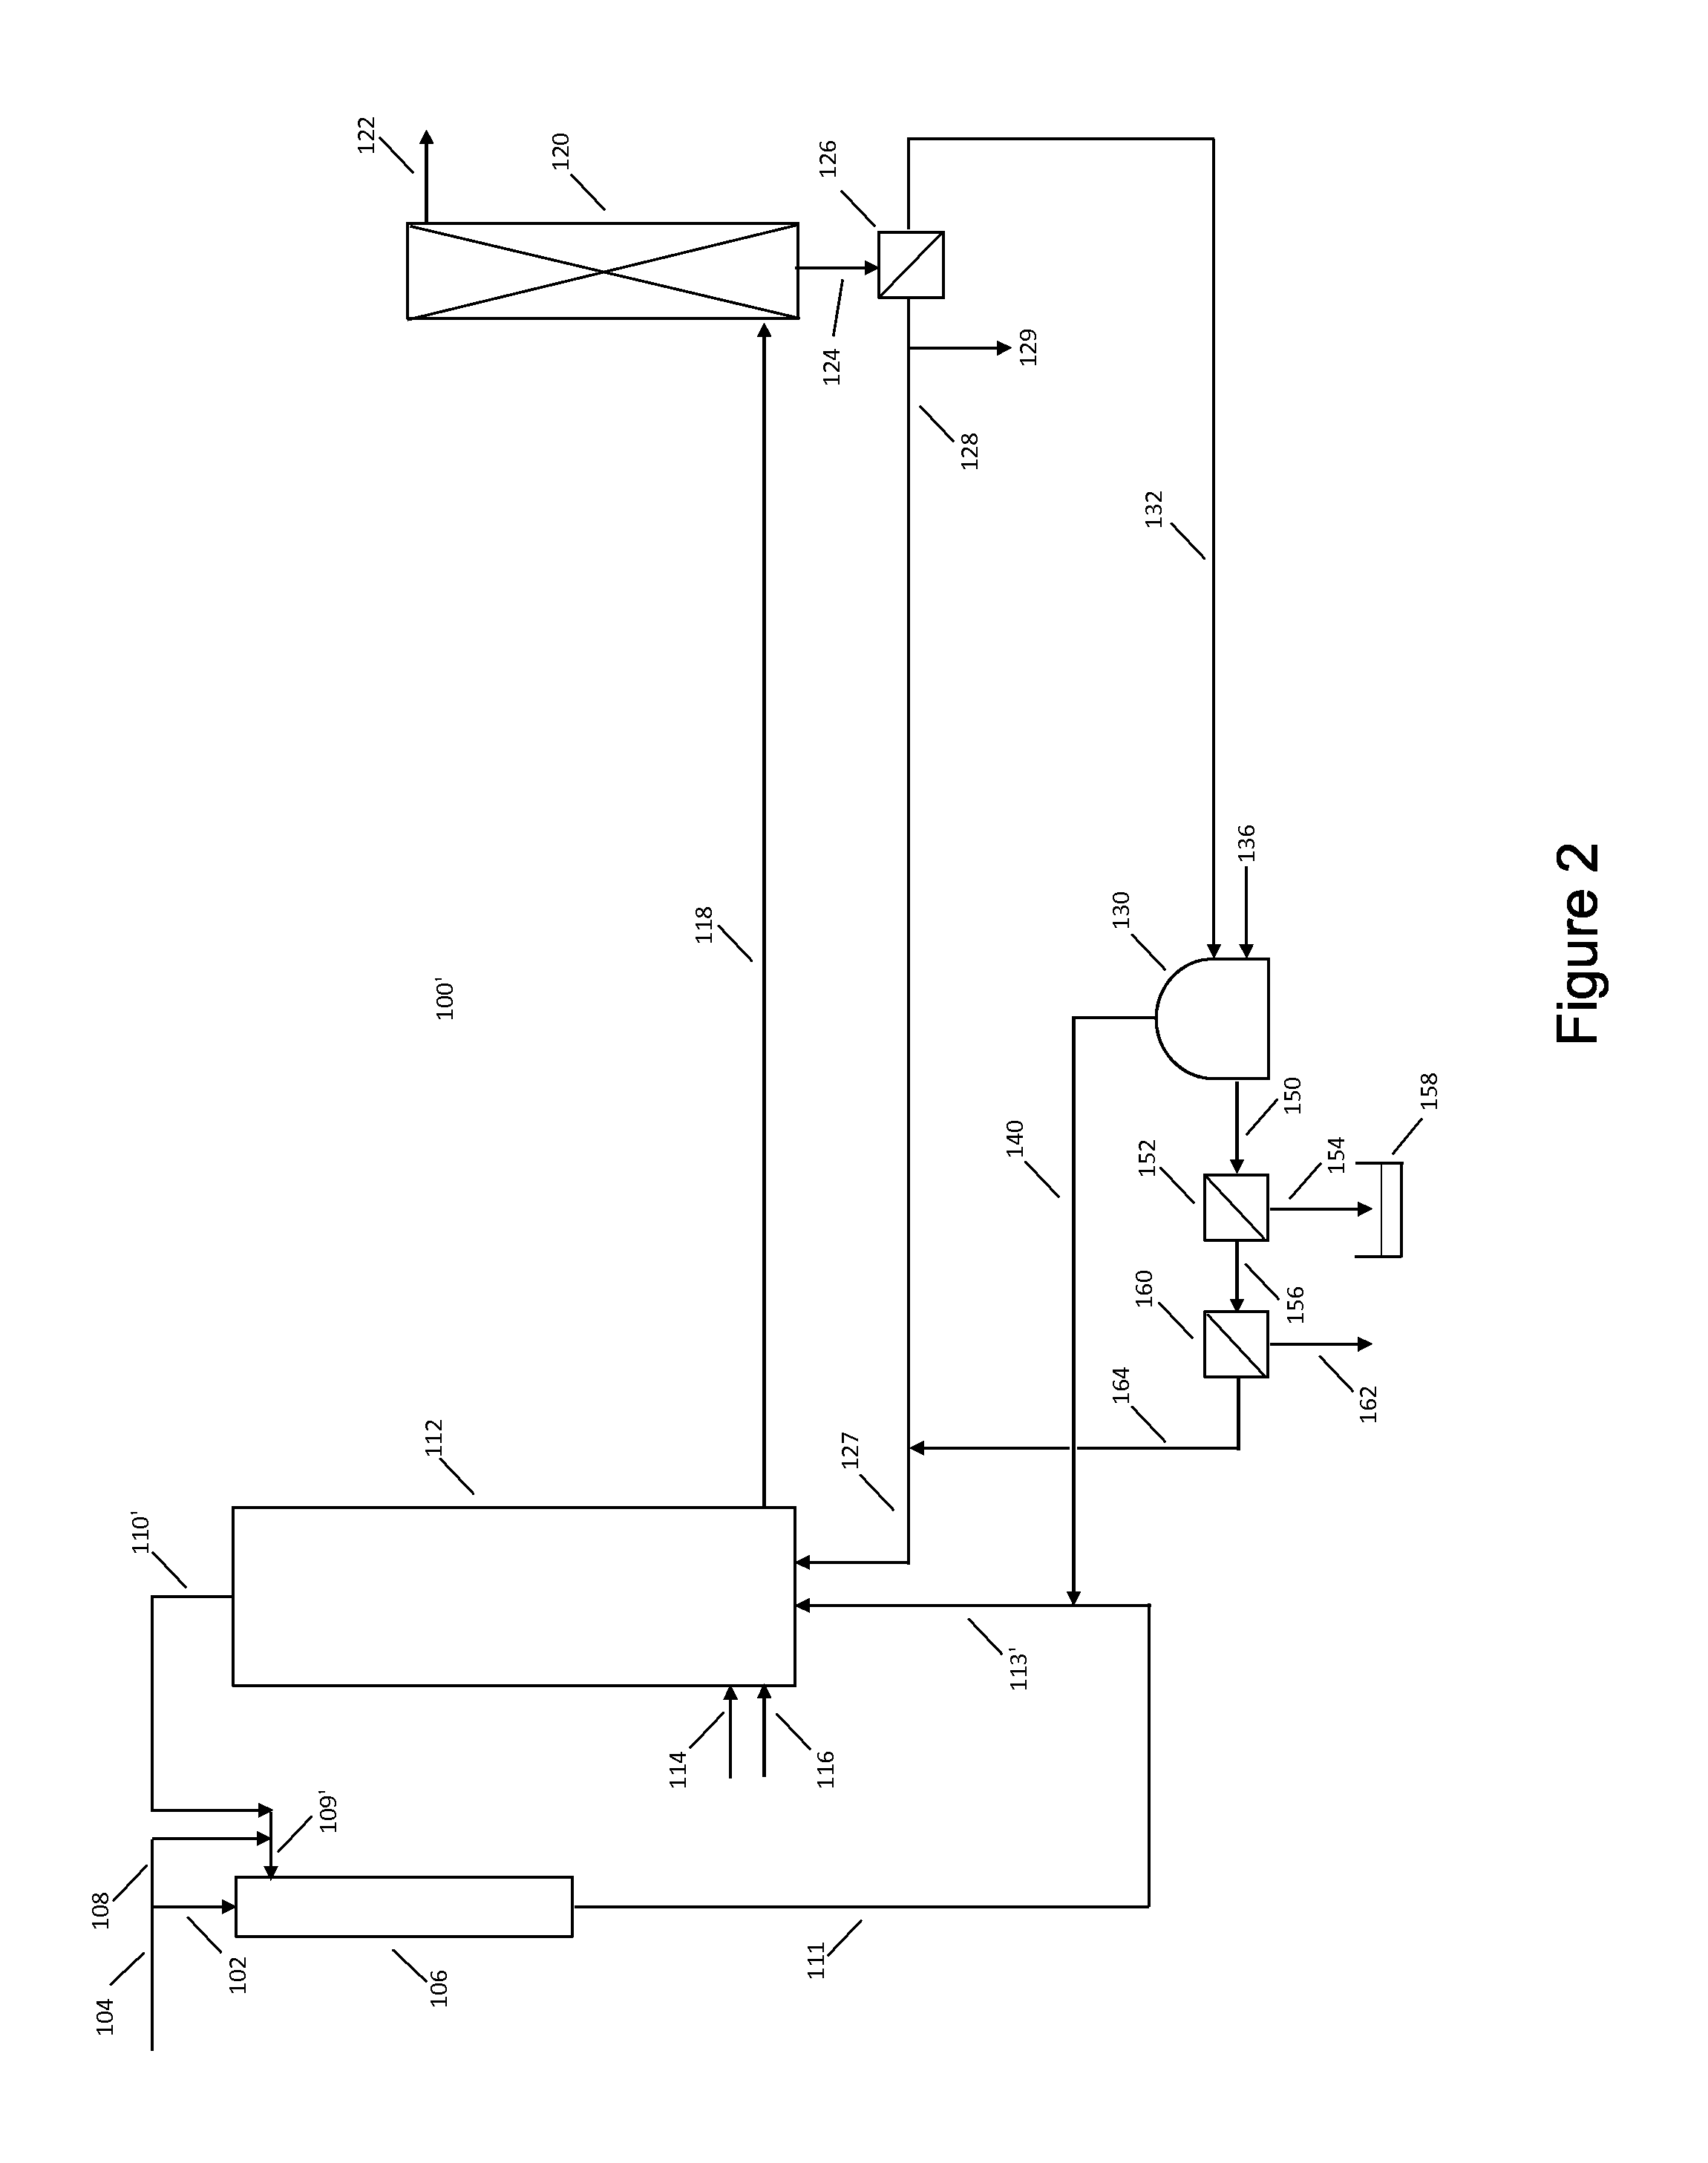 Integrated processes for anaerobically bioconverting hydrogen and carbon oxides to oxygenated organic compounds